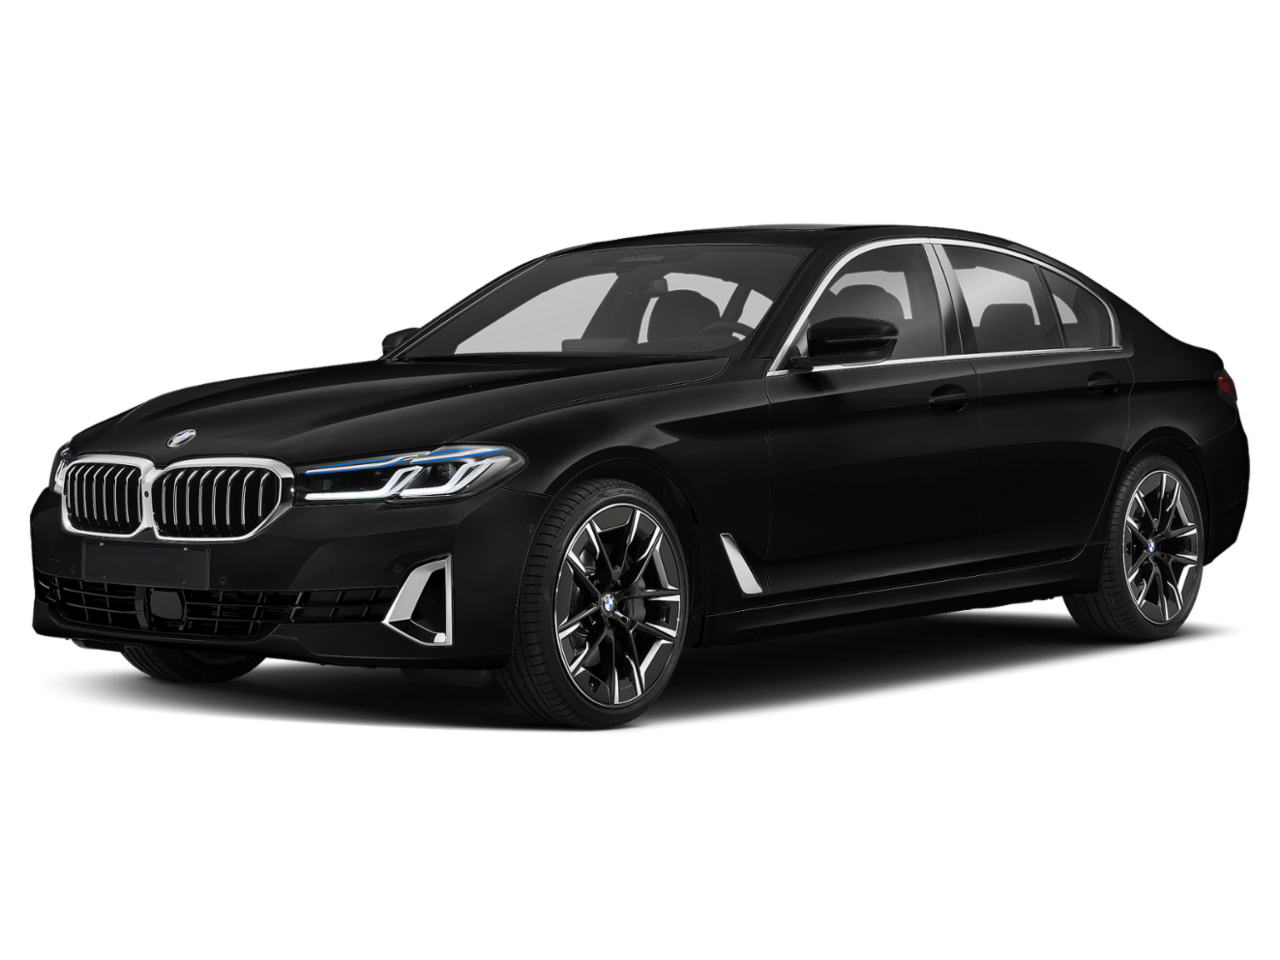 New 2021 BMW 530i xDrive Details from Garlyn Shelton Auto Group's